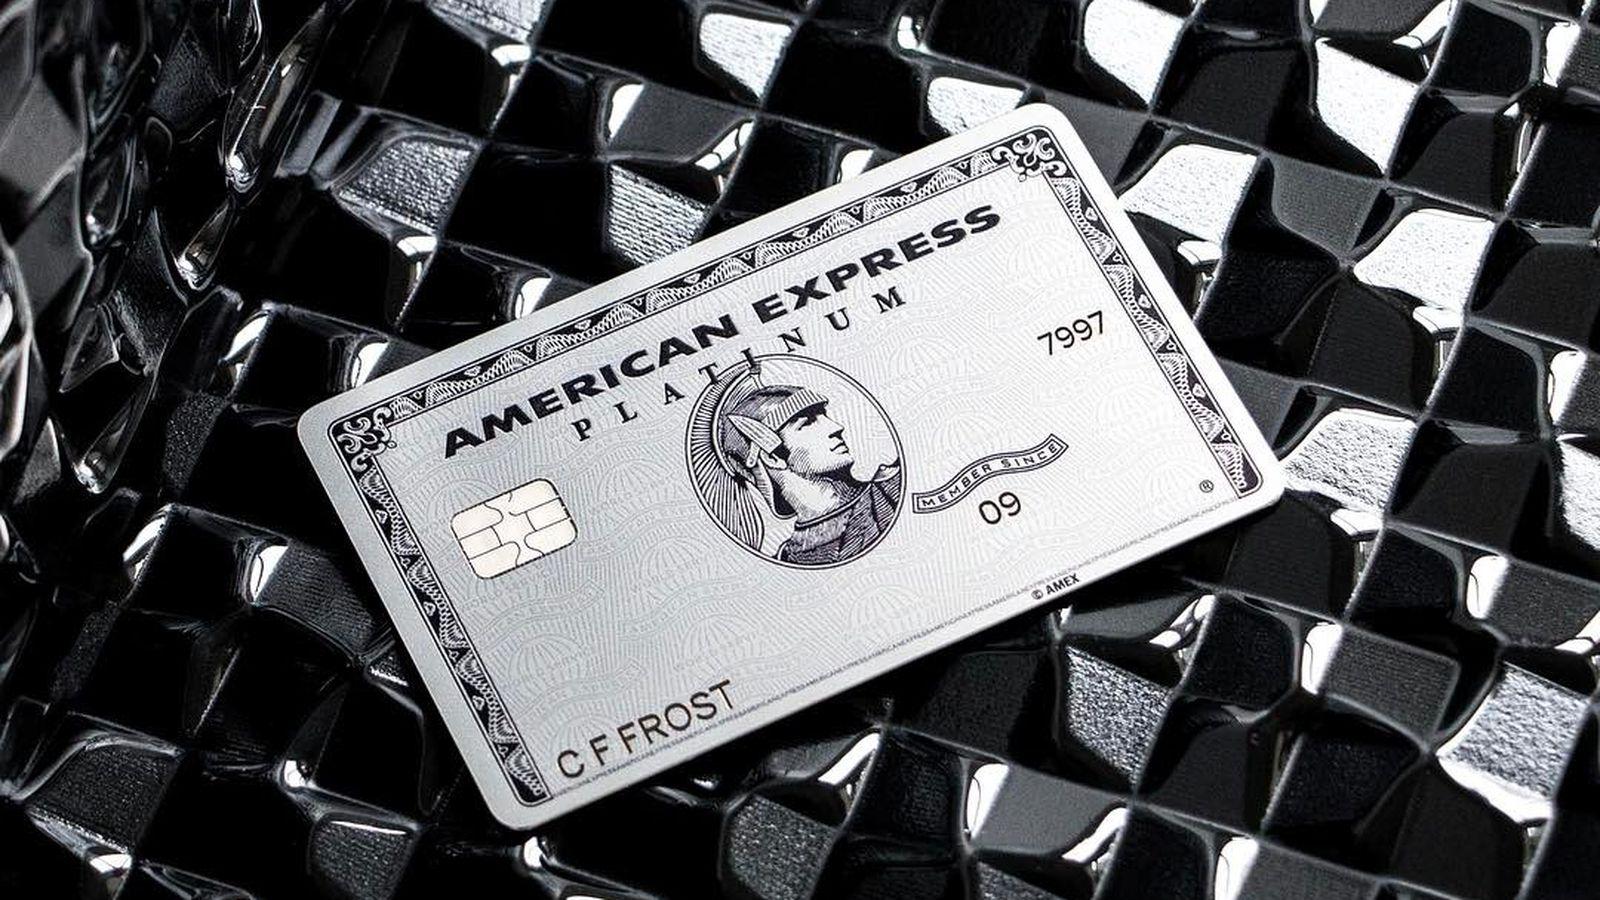 Amex Platinum cardholders will get $200 in free Uber rides every